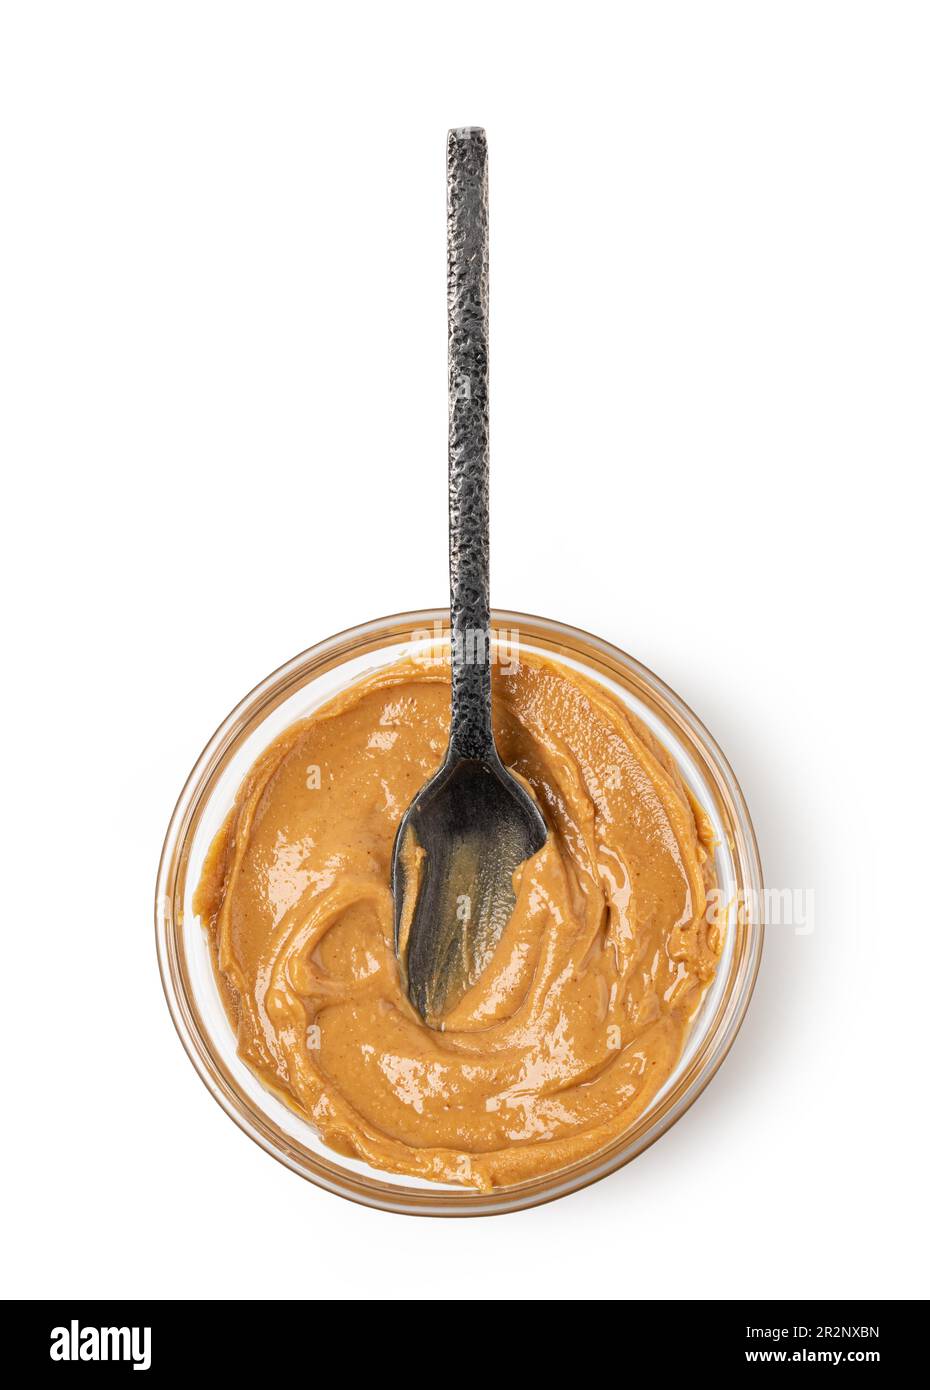 https://c8.alamy.com/comp/2R2NXBN/creamy-peanut-butter-in-spoon-on-white-background-2R2NXBN.jpg